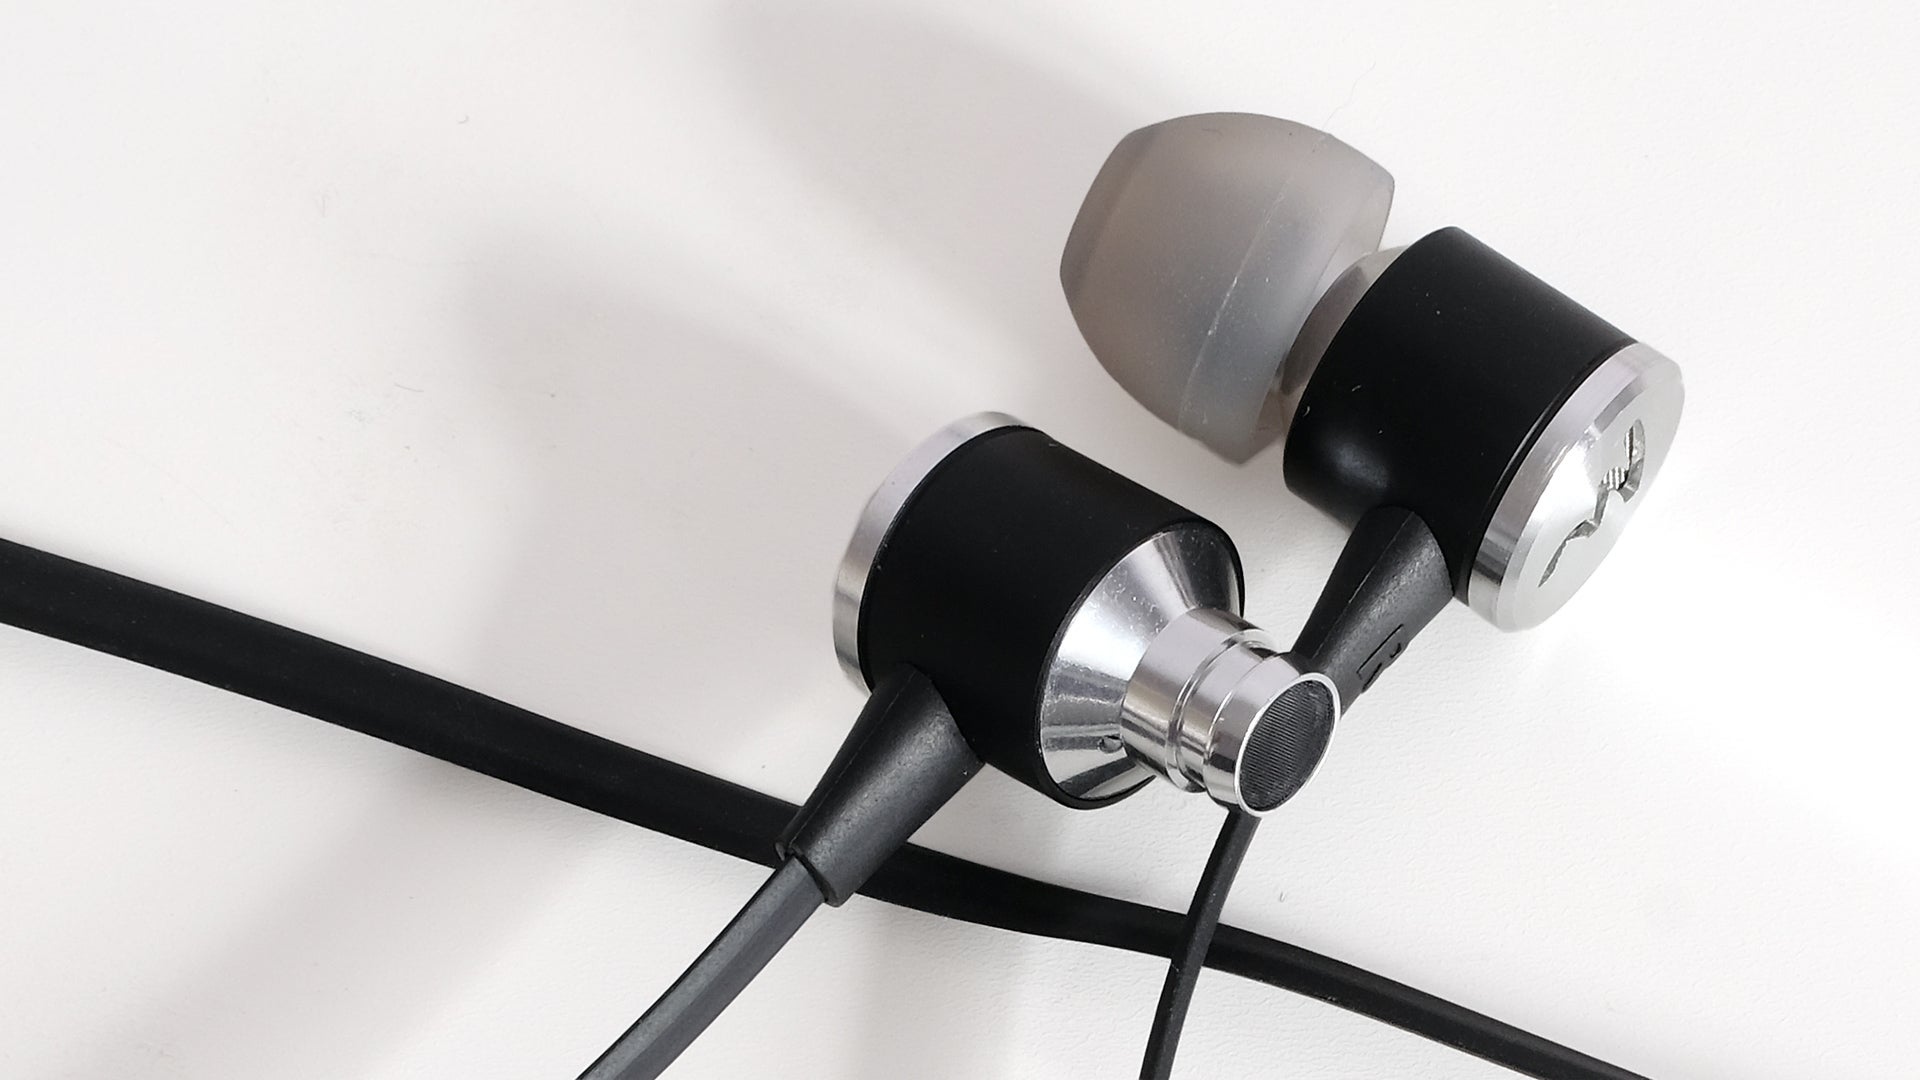 Close-up of Focal Spark Wireless earphones on white background.